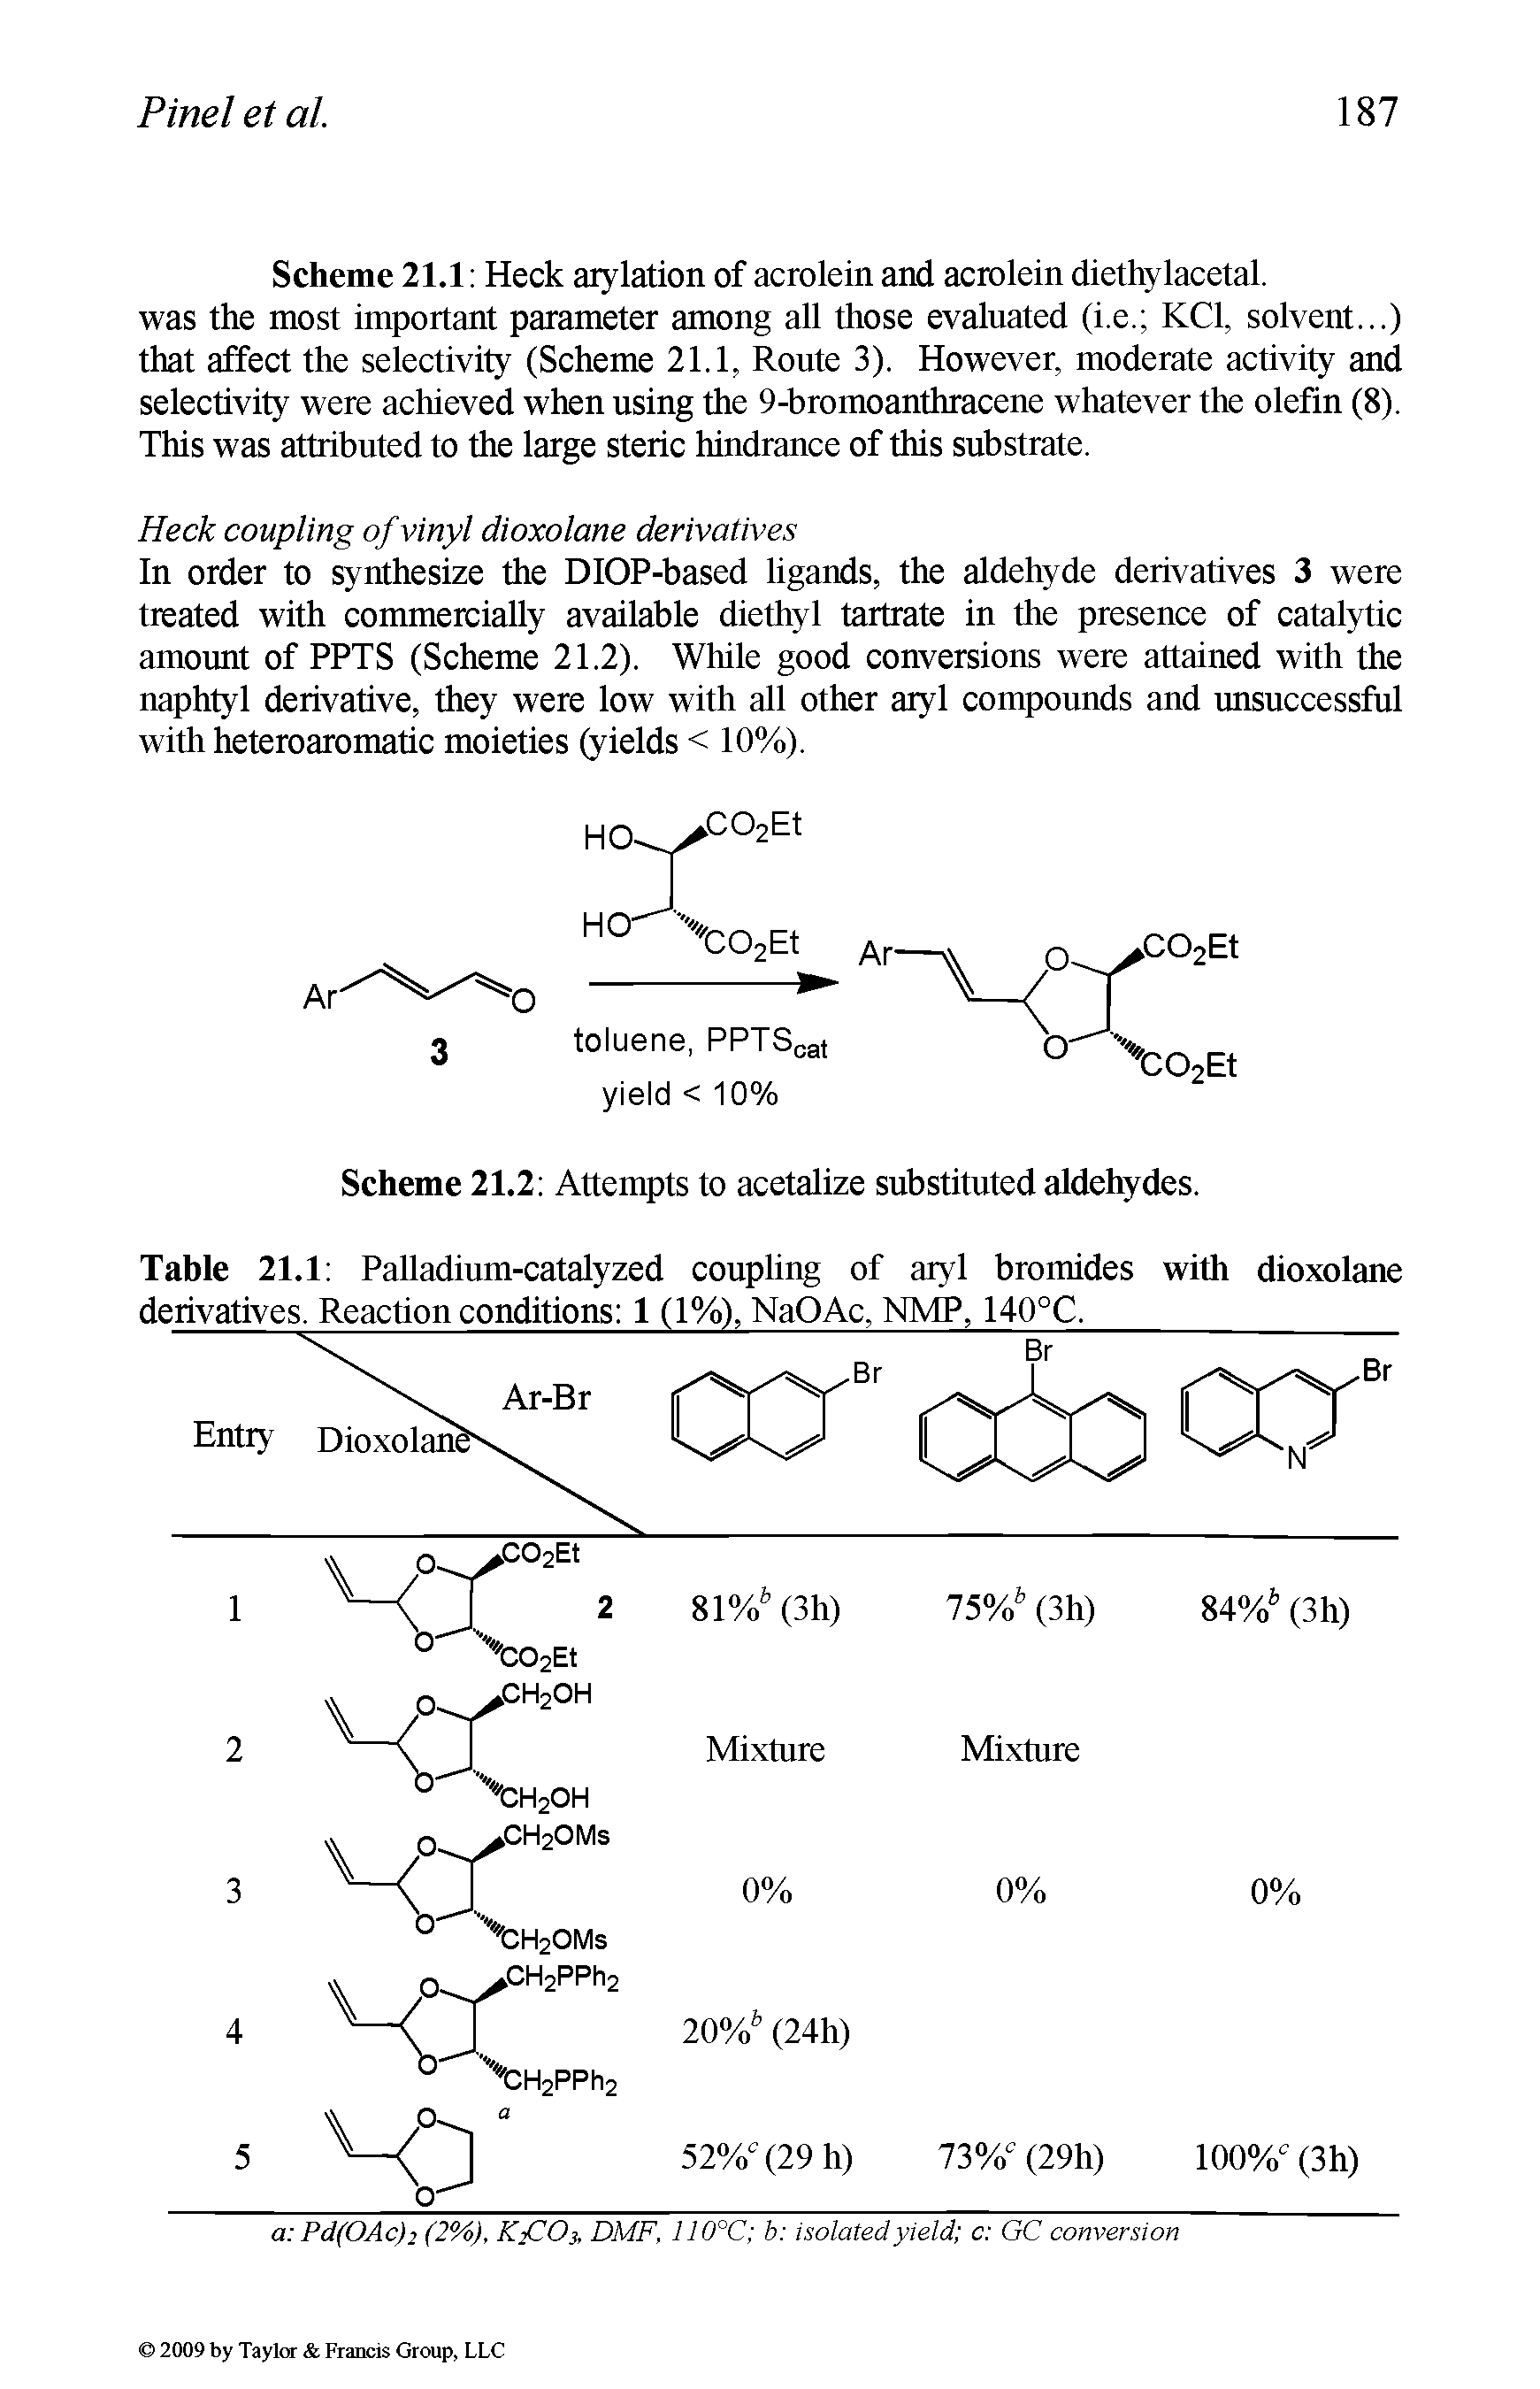 Scheme 21.1 Heck arylation of acrolein and acrolein diethylacetal. was the most important parameter among all those evaluated (i.e. KCl, solvent...) that affect the selectivity (Scheme 21.1, Route 3). However, moderate activity and selectivity were achieved when using the 9-bromoanthracene whatever the olefin (8). This was attributed to the large steric hindrance of this substrate.